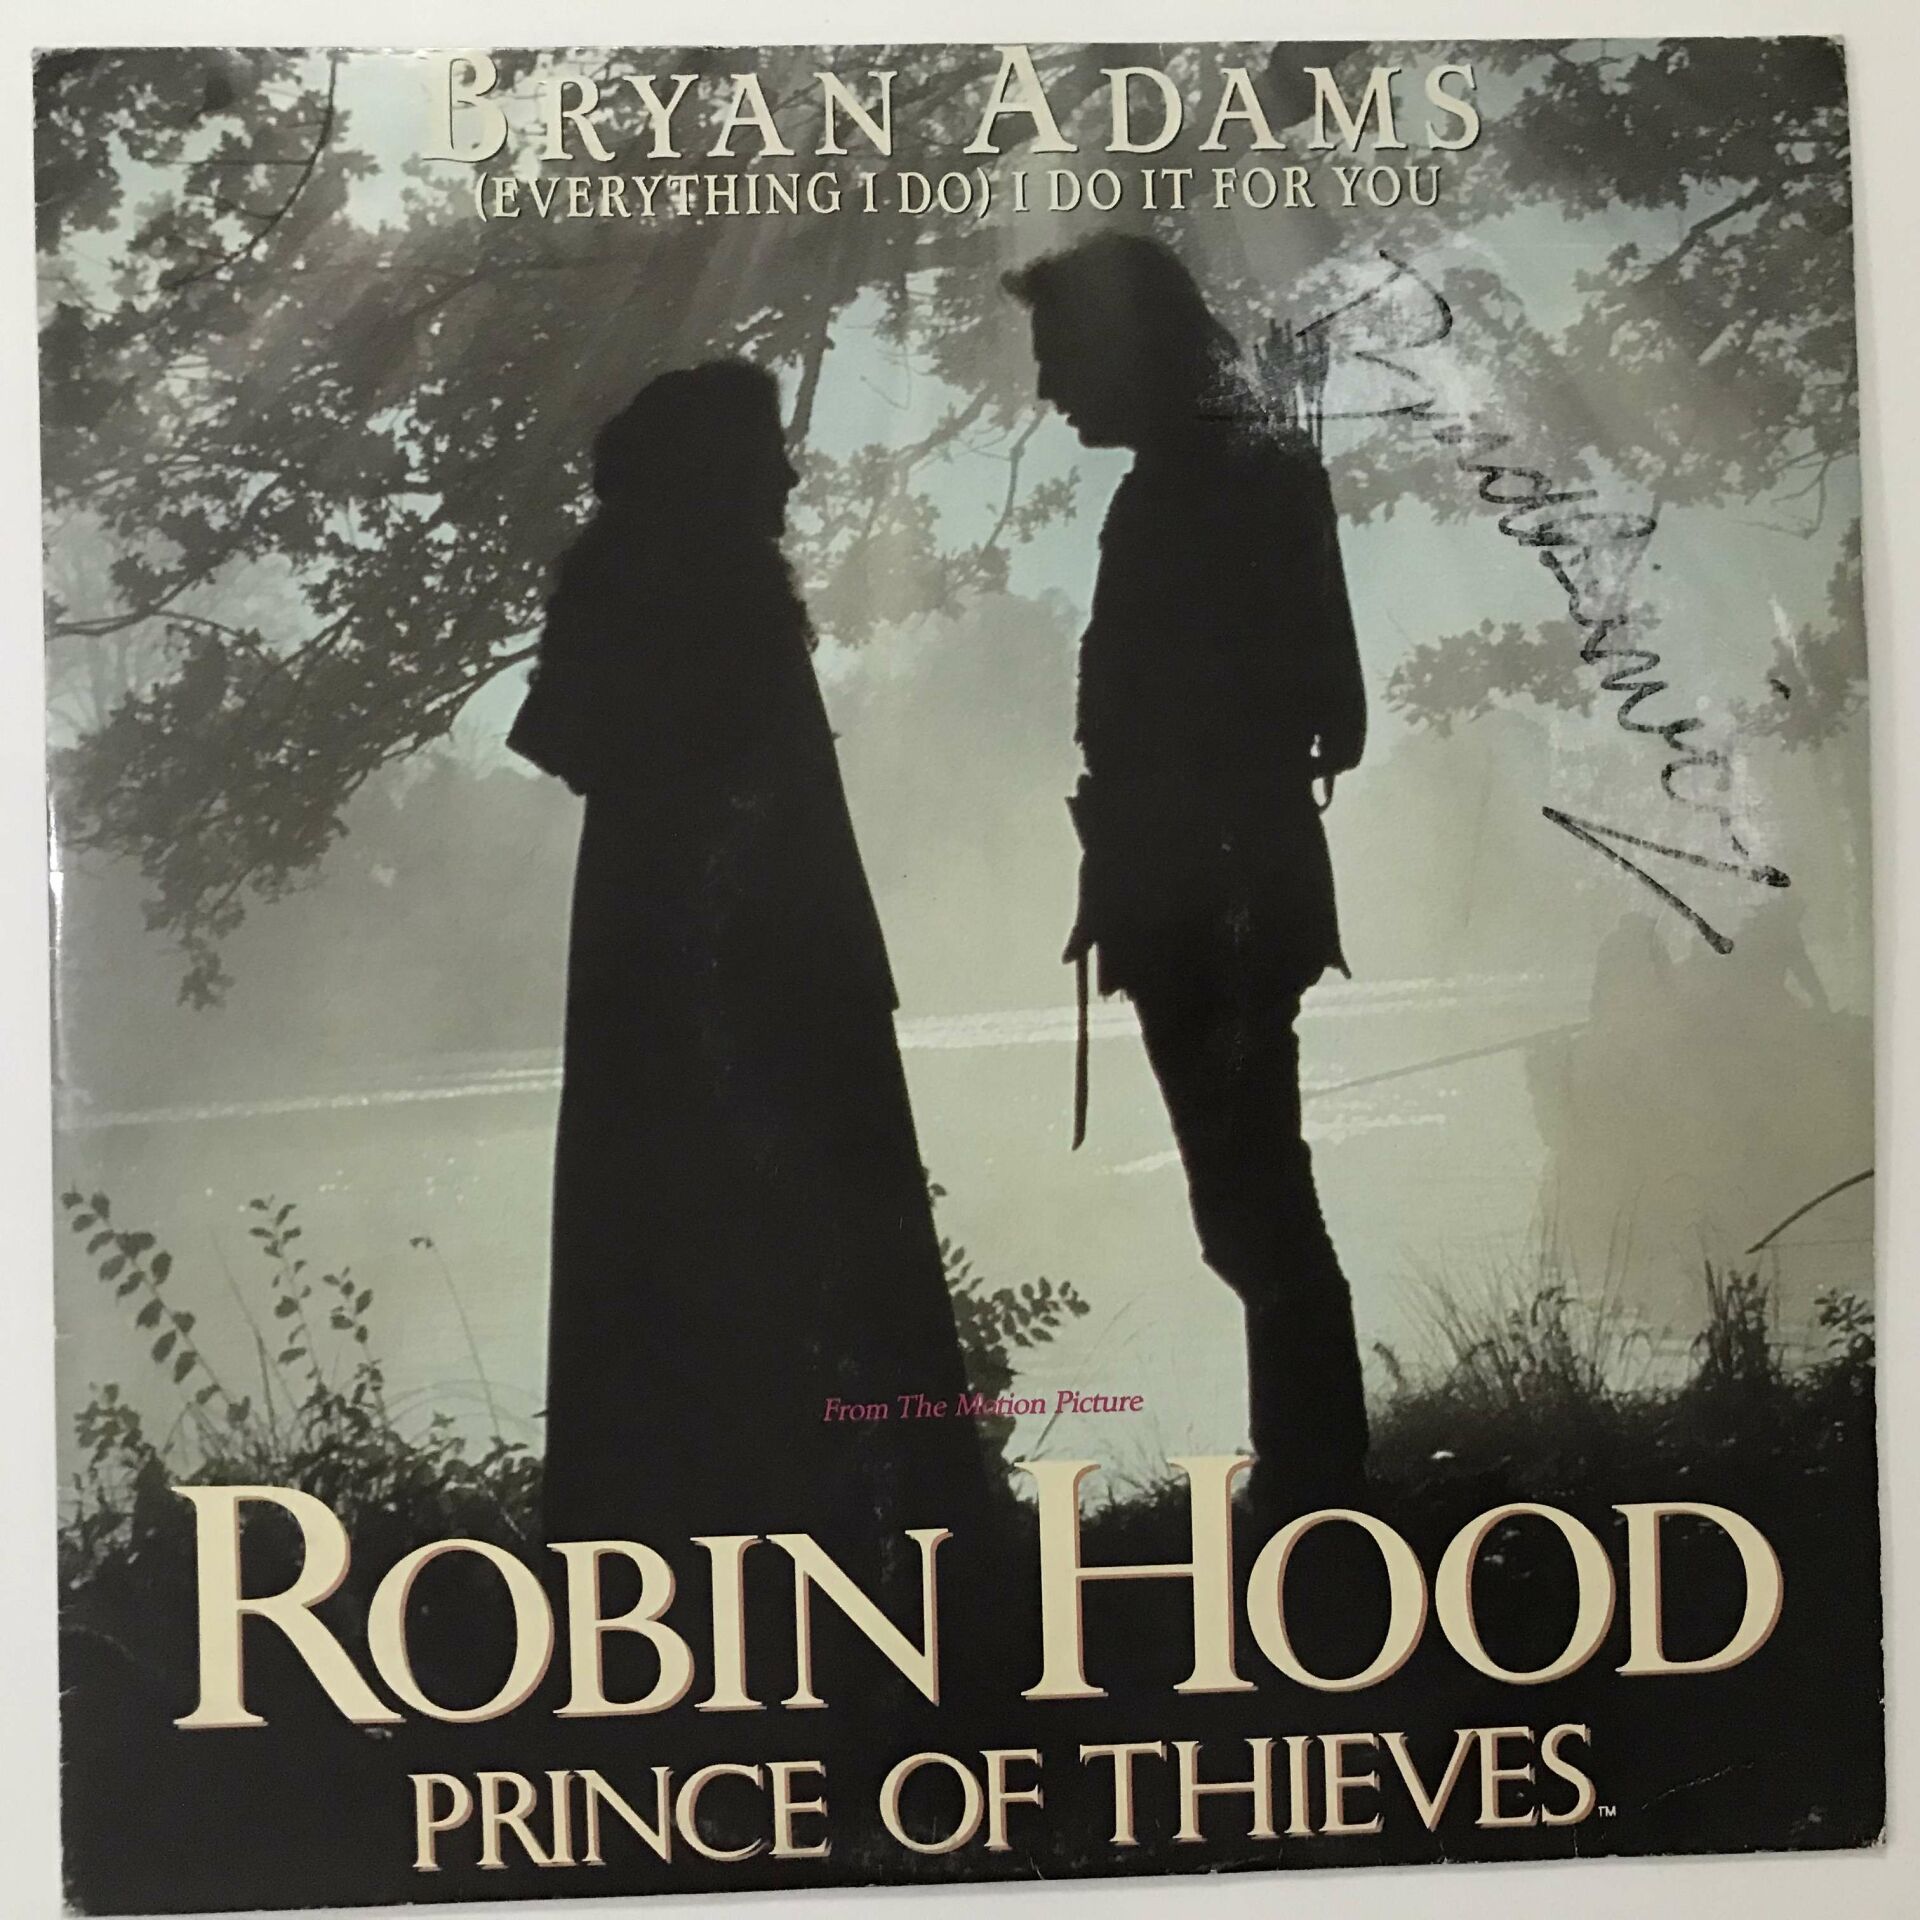 Bryan Adams ‎– (Everything I Do) I Do It For You (Robin Hood)